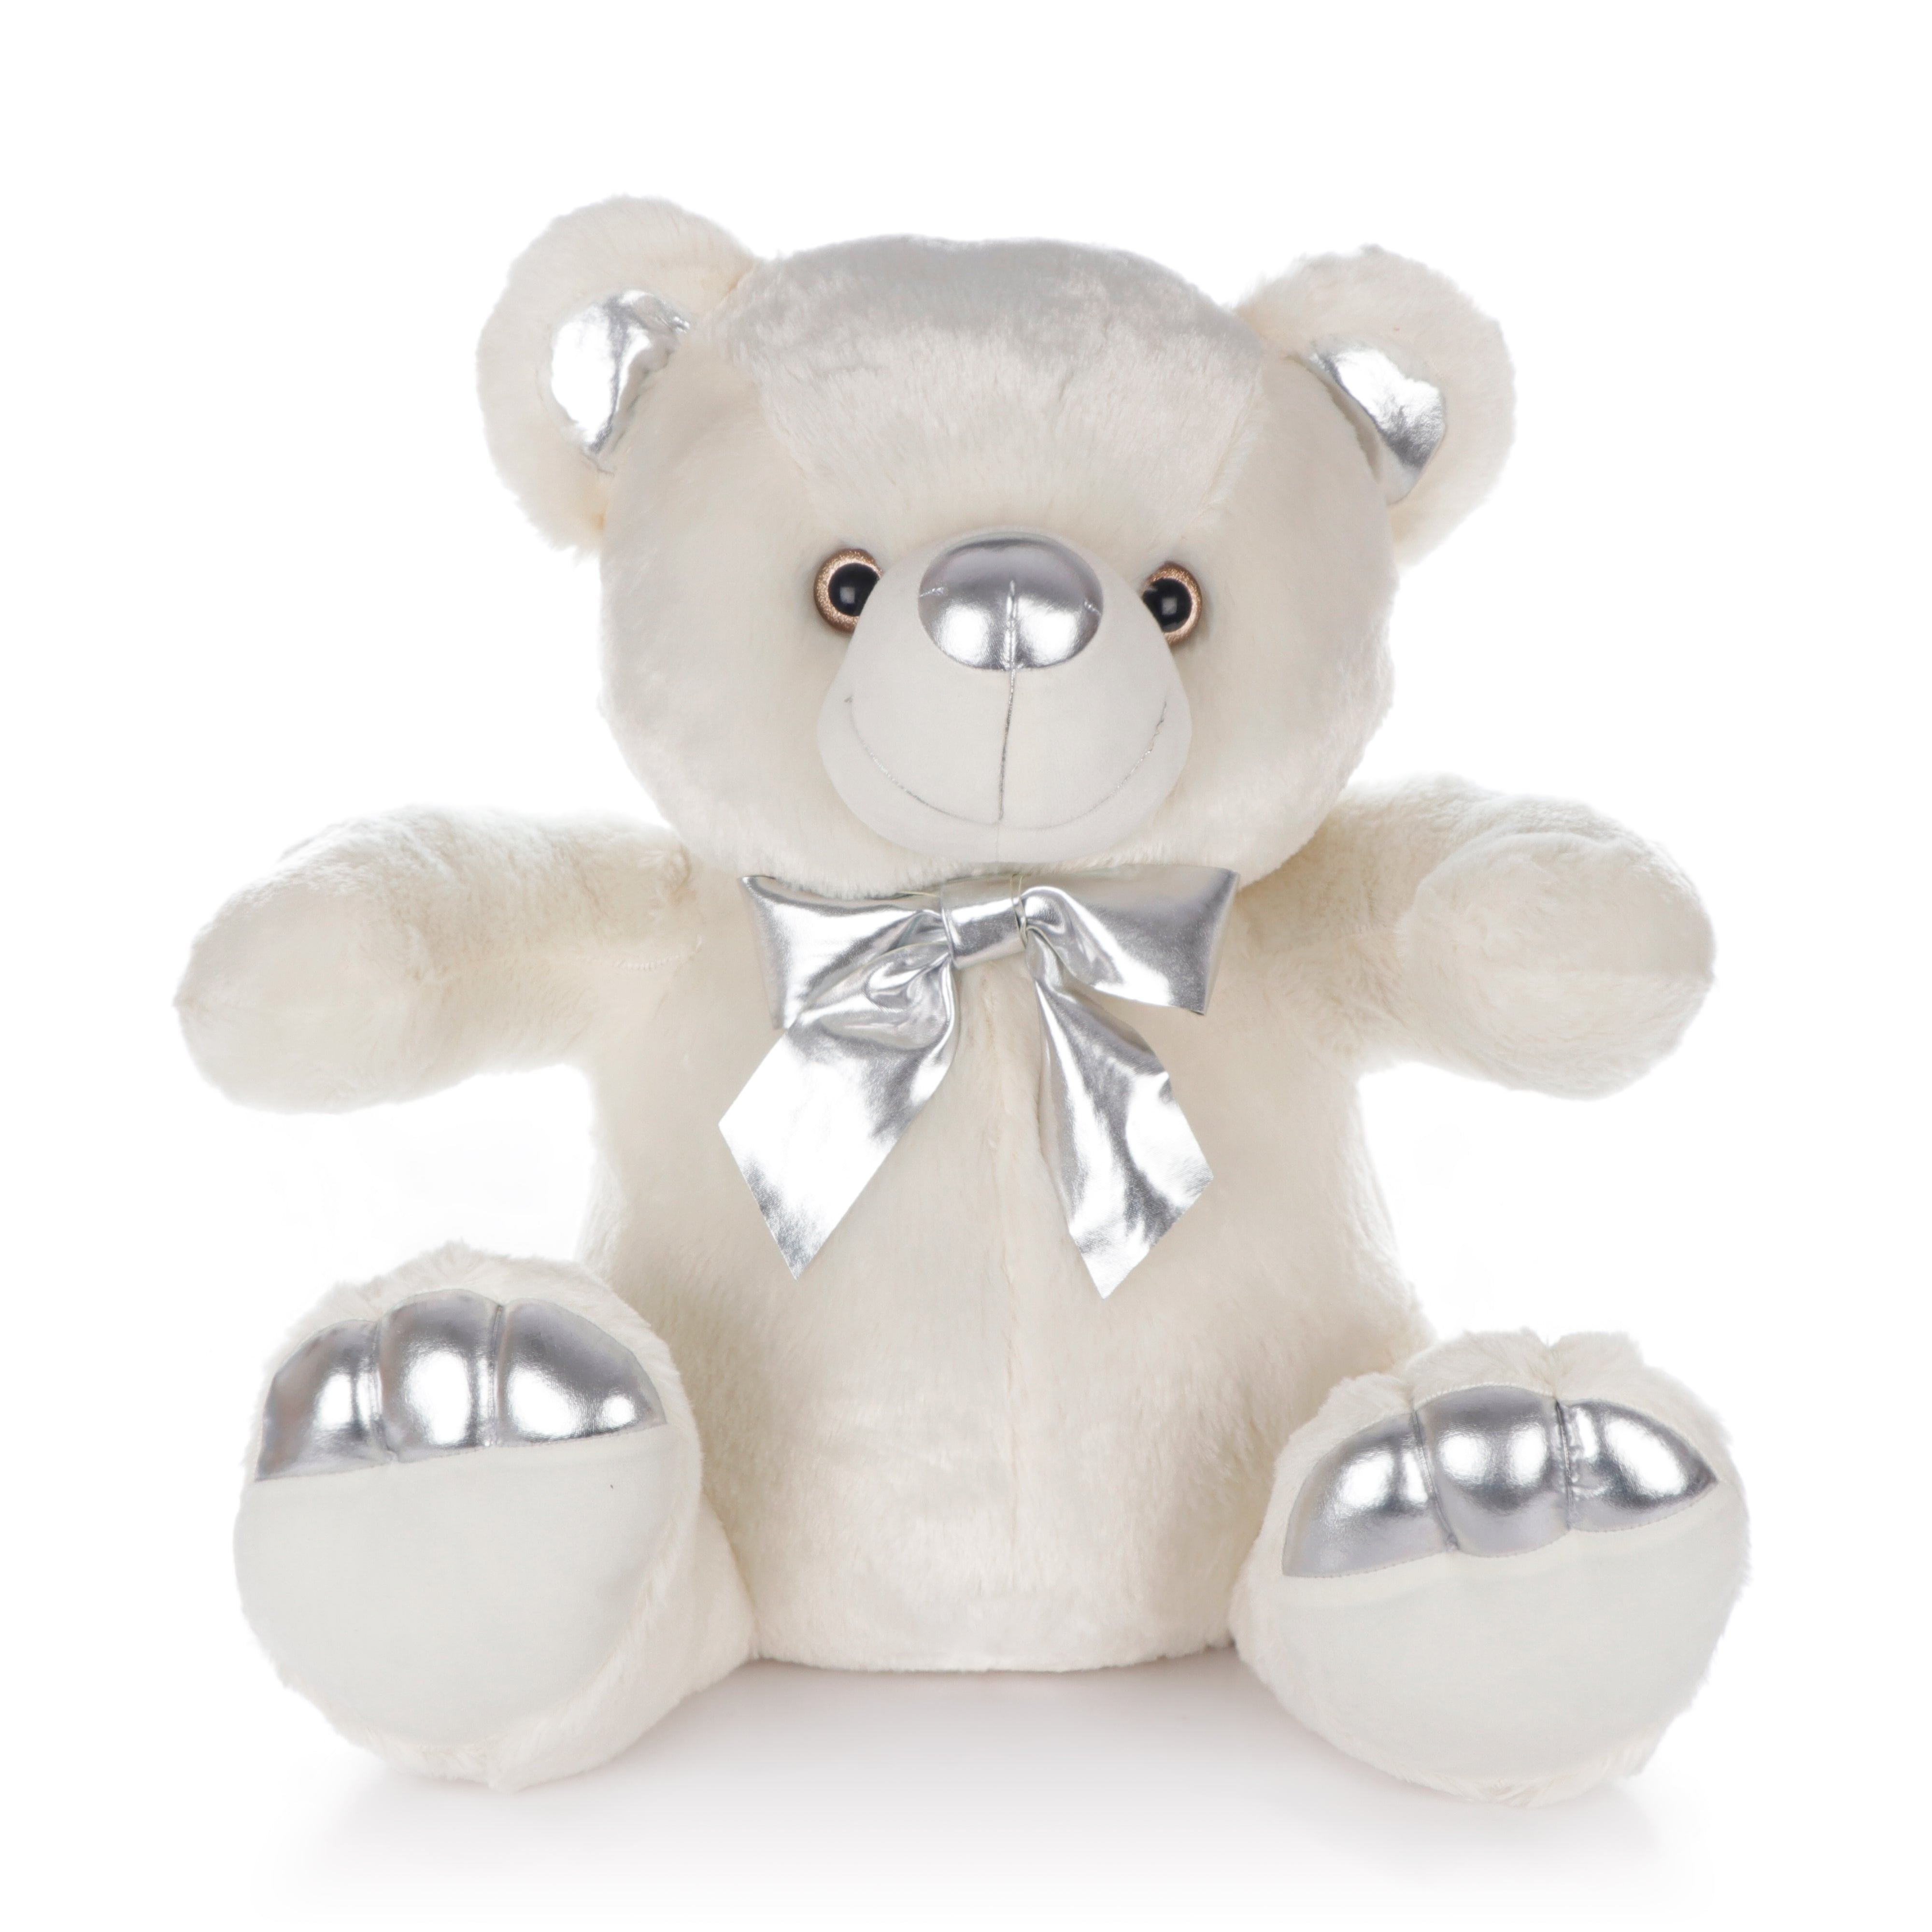 Archies | Archies Soft Toys, Teddy Bear For Girls, Soft Toys Boyfriend, Husband For Kids, Birthday Gift For Girls,Wife,   White Teddy Bear with Golden Paws - 55CM